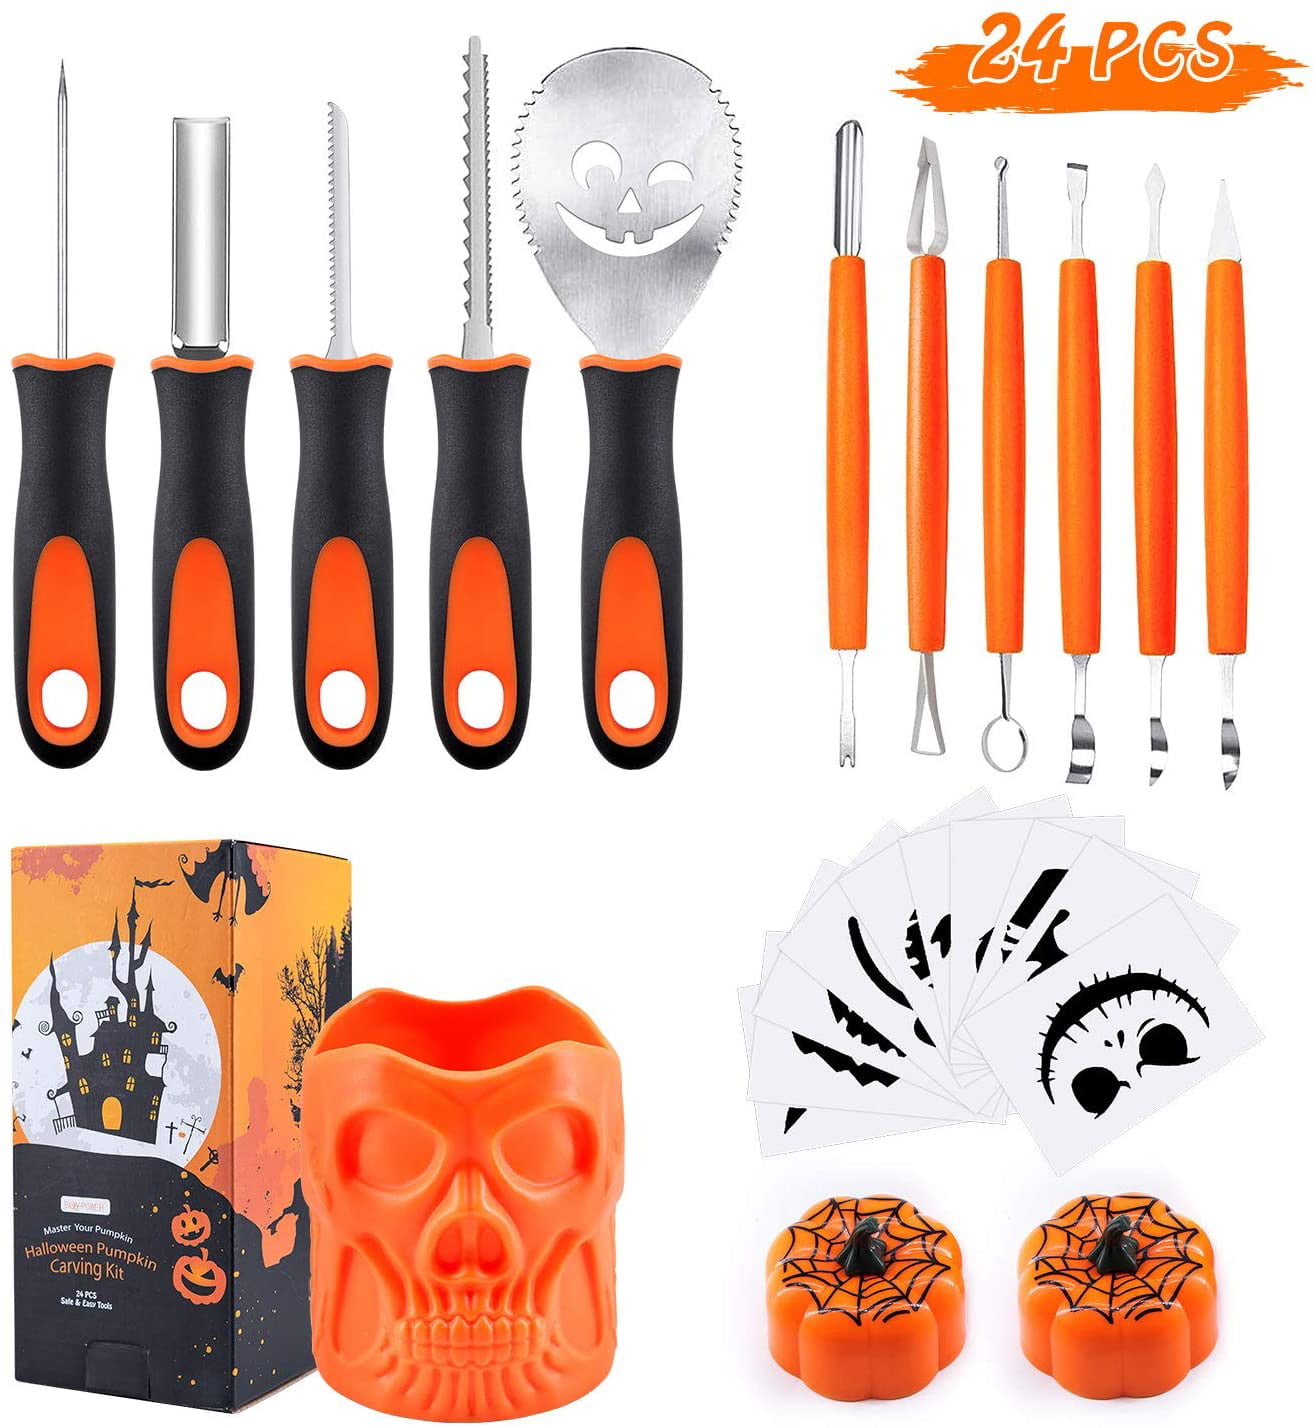 BQYPOWER 24 Piece Professional Pumpkin Cutting Tools Set Heavy Duty Stainless Steel Carving Tools for Pumpkin Jack-o-Lanterns with Orange Storage Bucket Pumpkin Lanterns Halloween Pumpkin Carving Kit